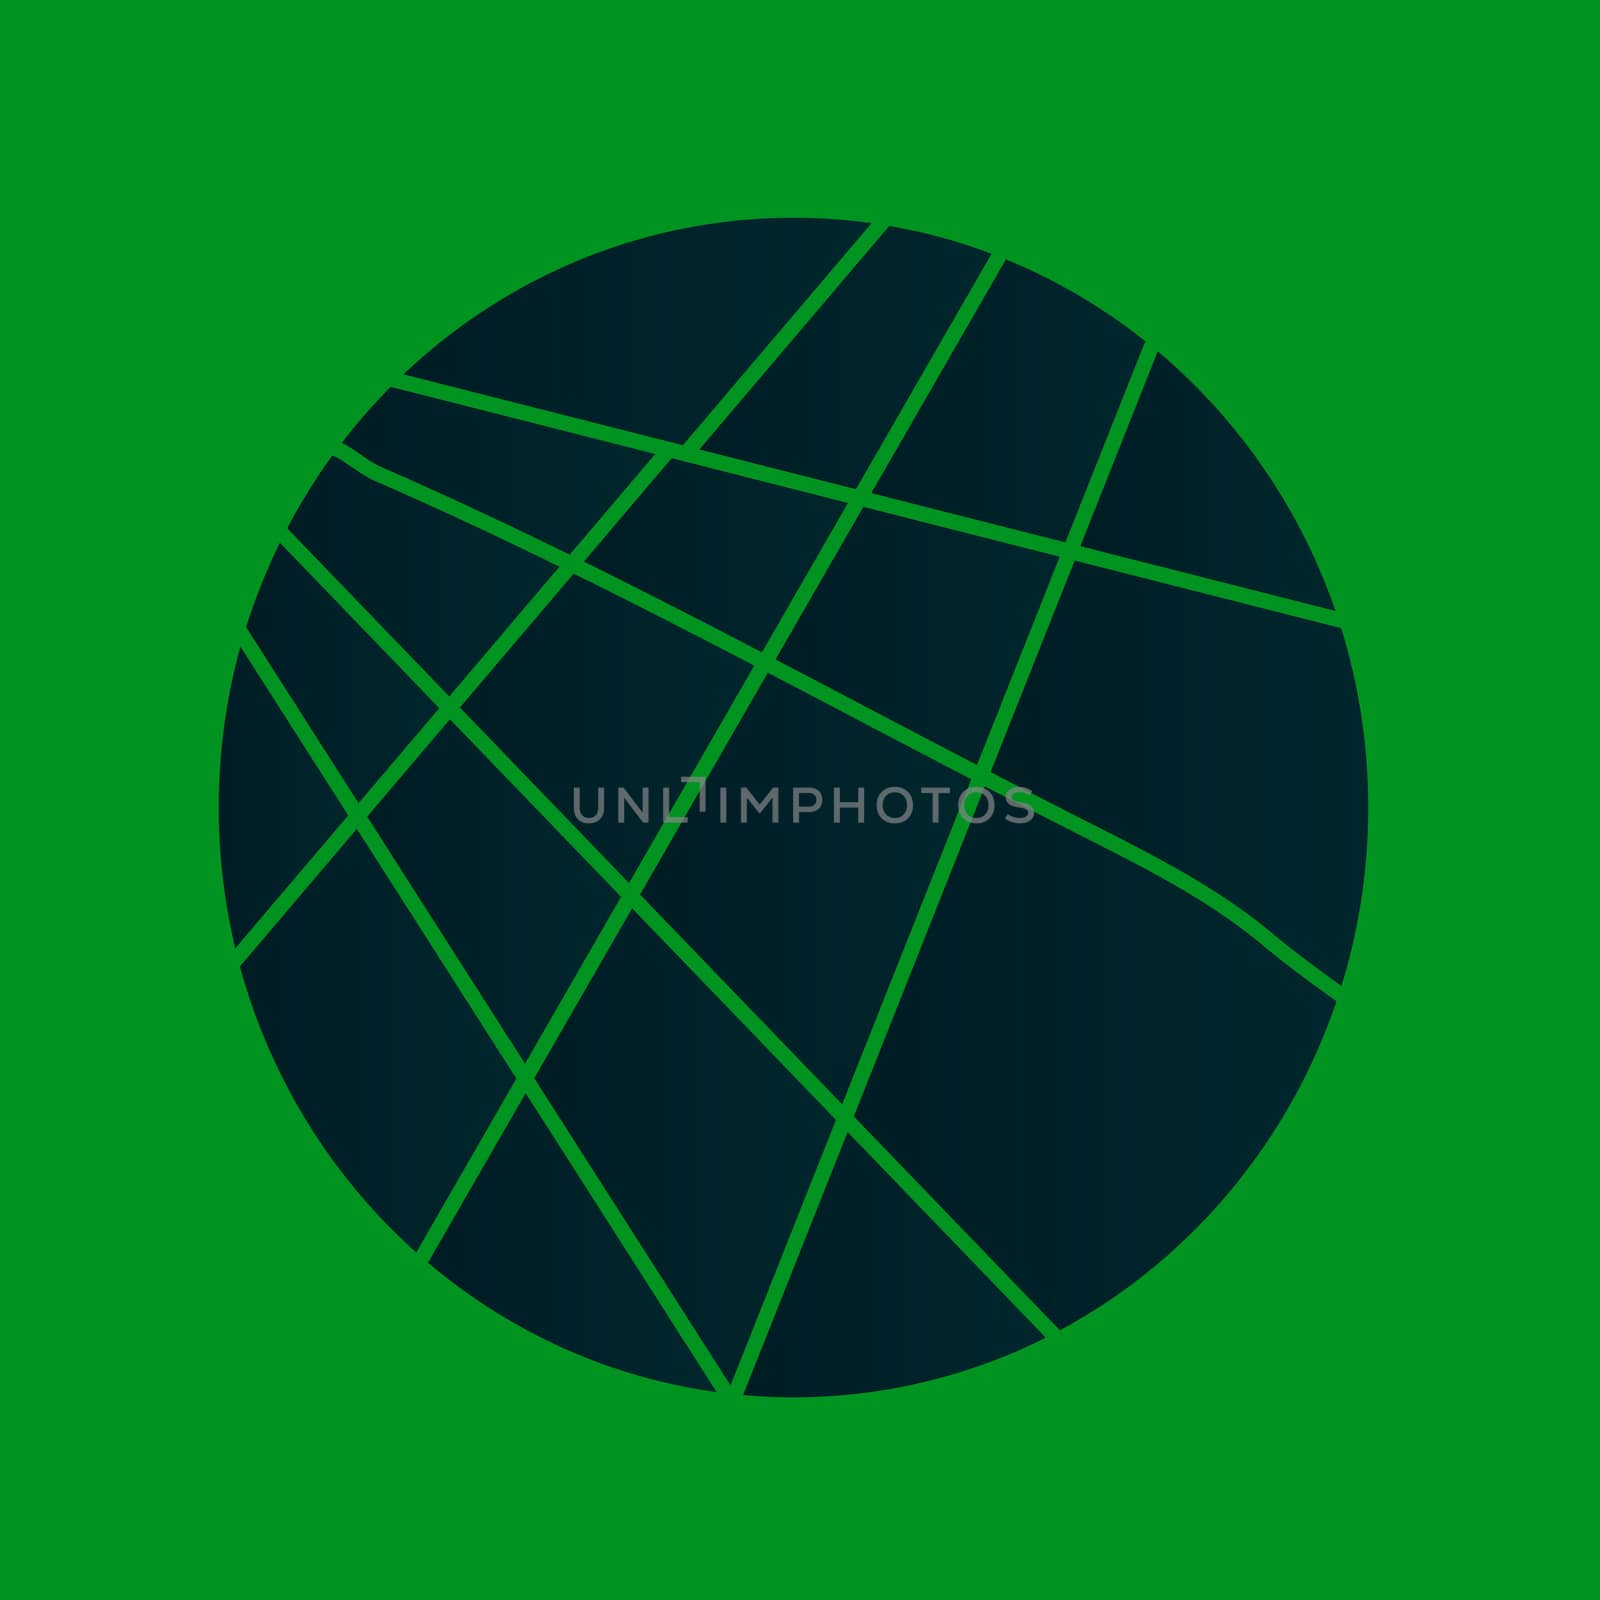 A dark green disc sliced over a bright green background